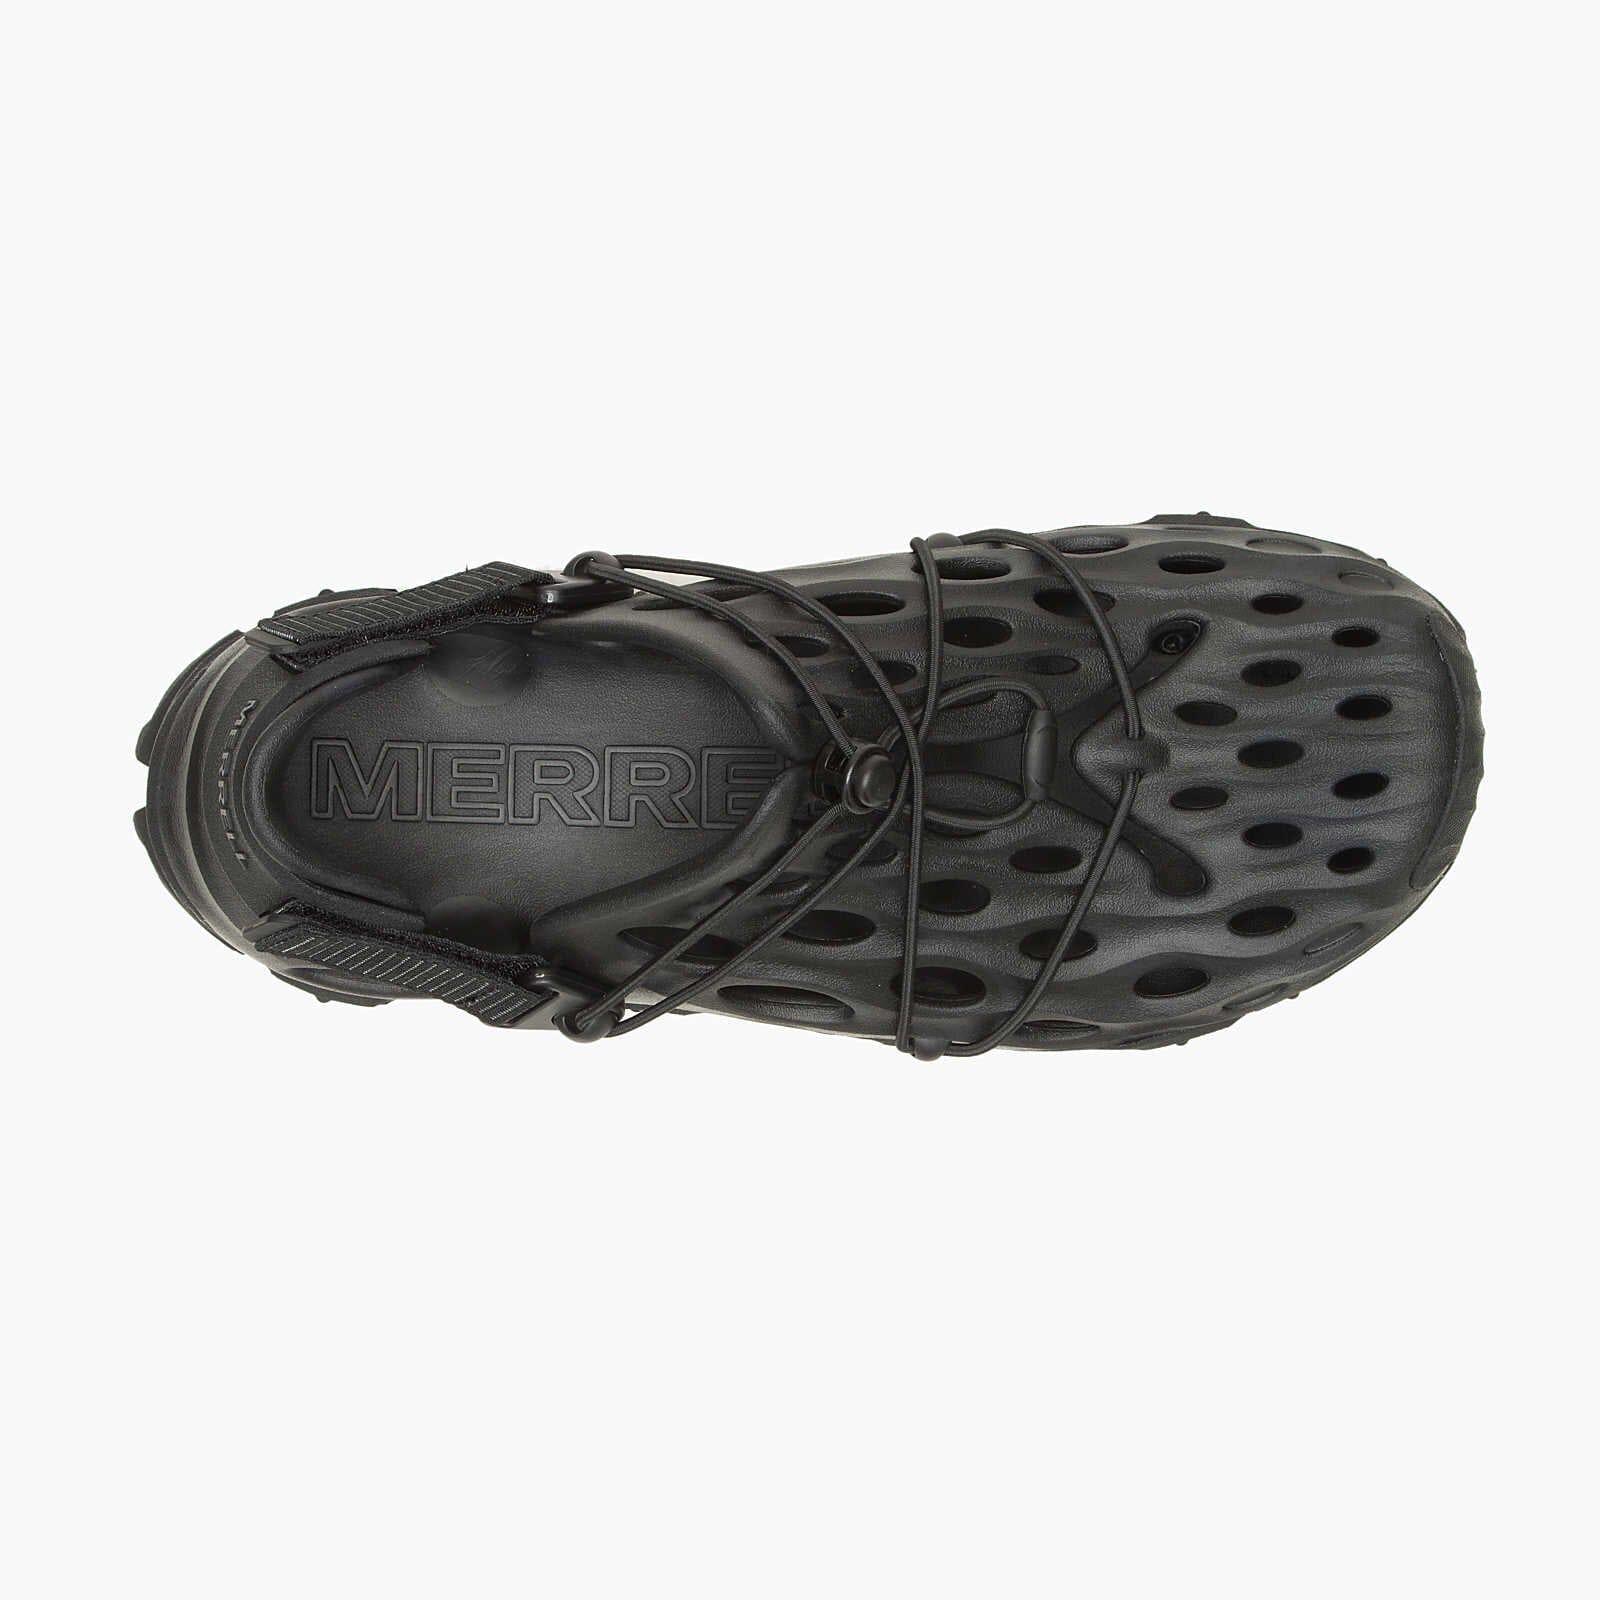 Merrell Men's Hydro Moc AT Cage 1TRL Sandals 